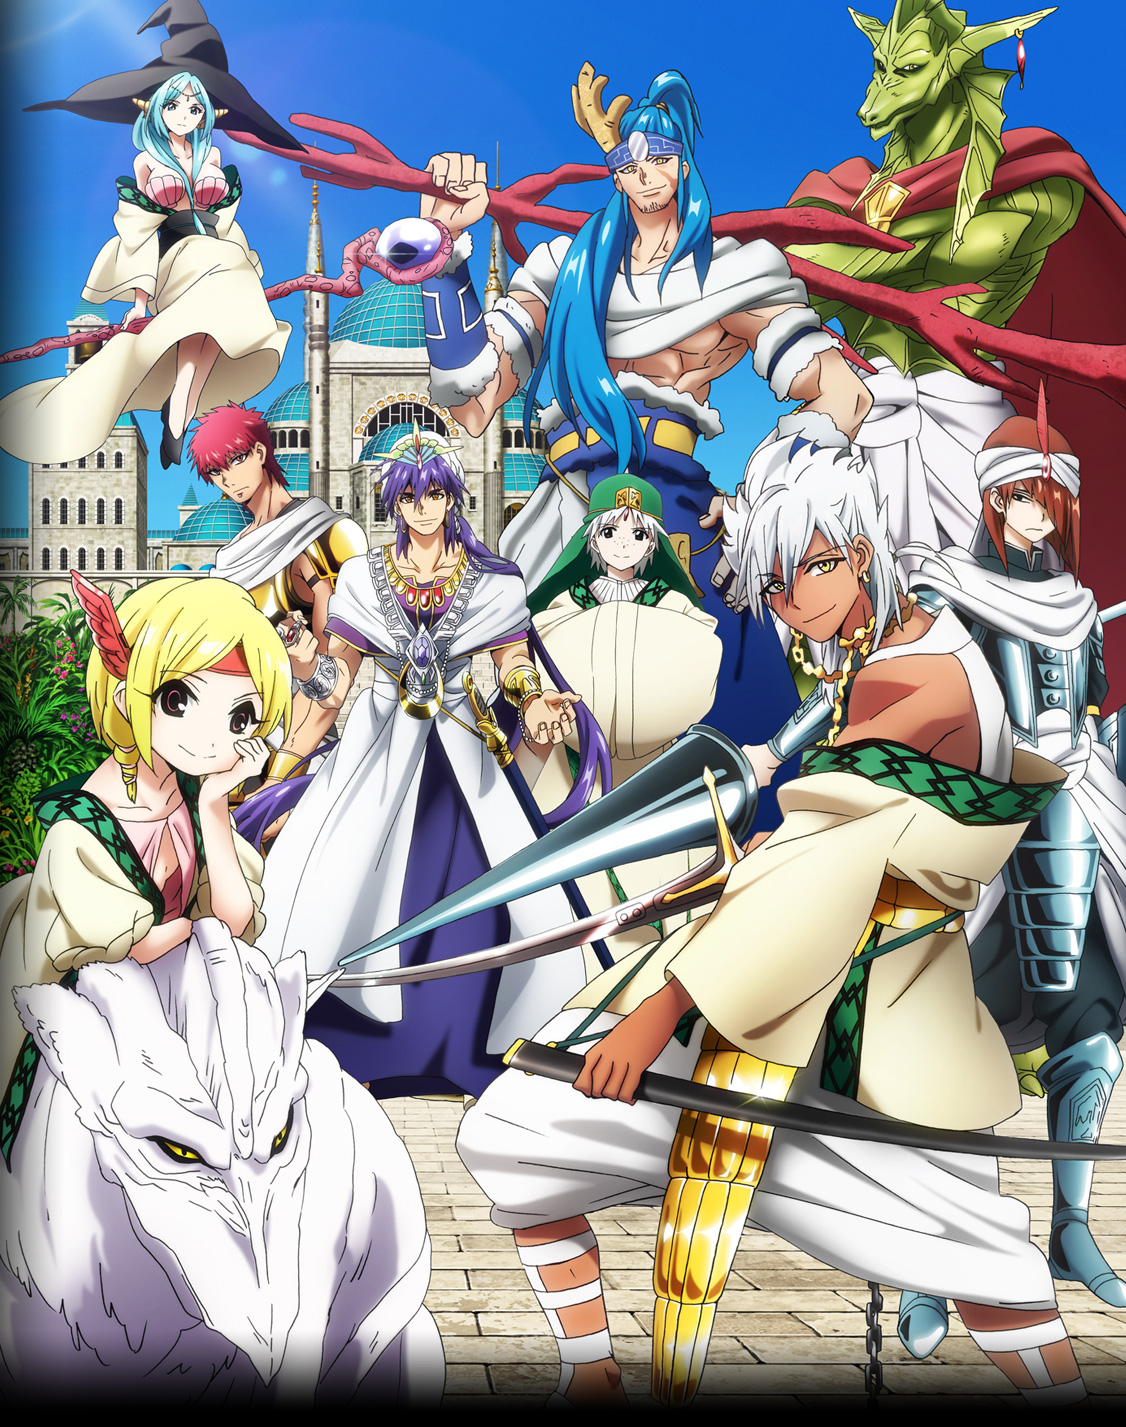 The Labyrinth Of Magic - Magi The Adventures Of Sinbad Characters -  1126x1427 Wallpaper 